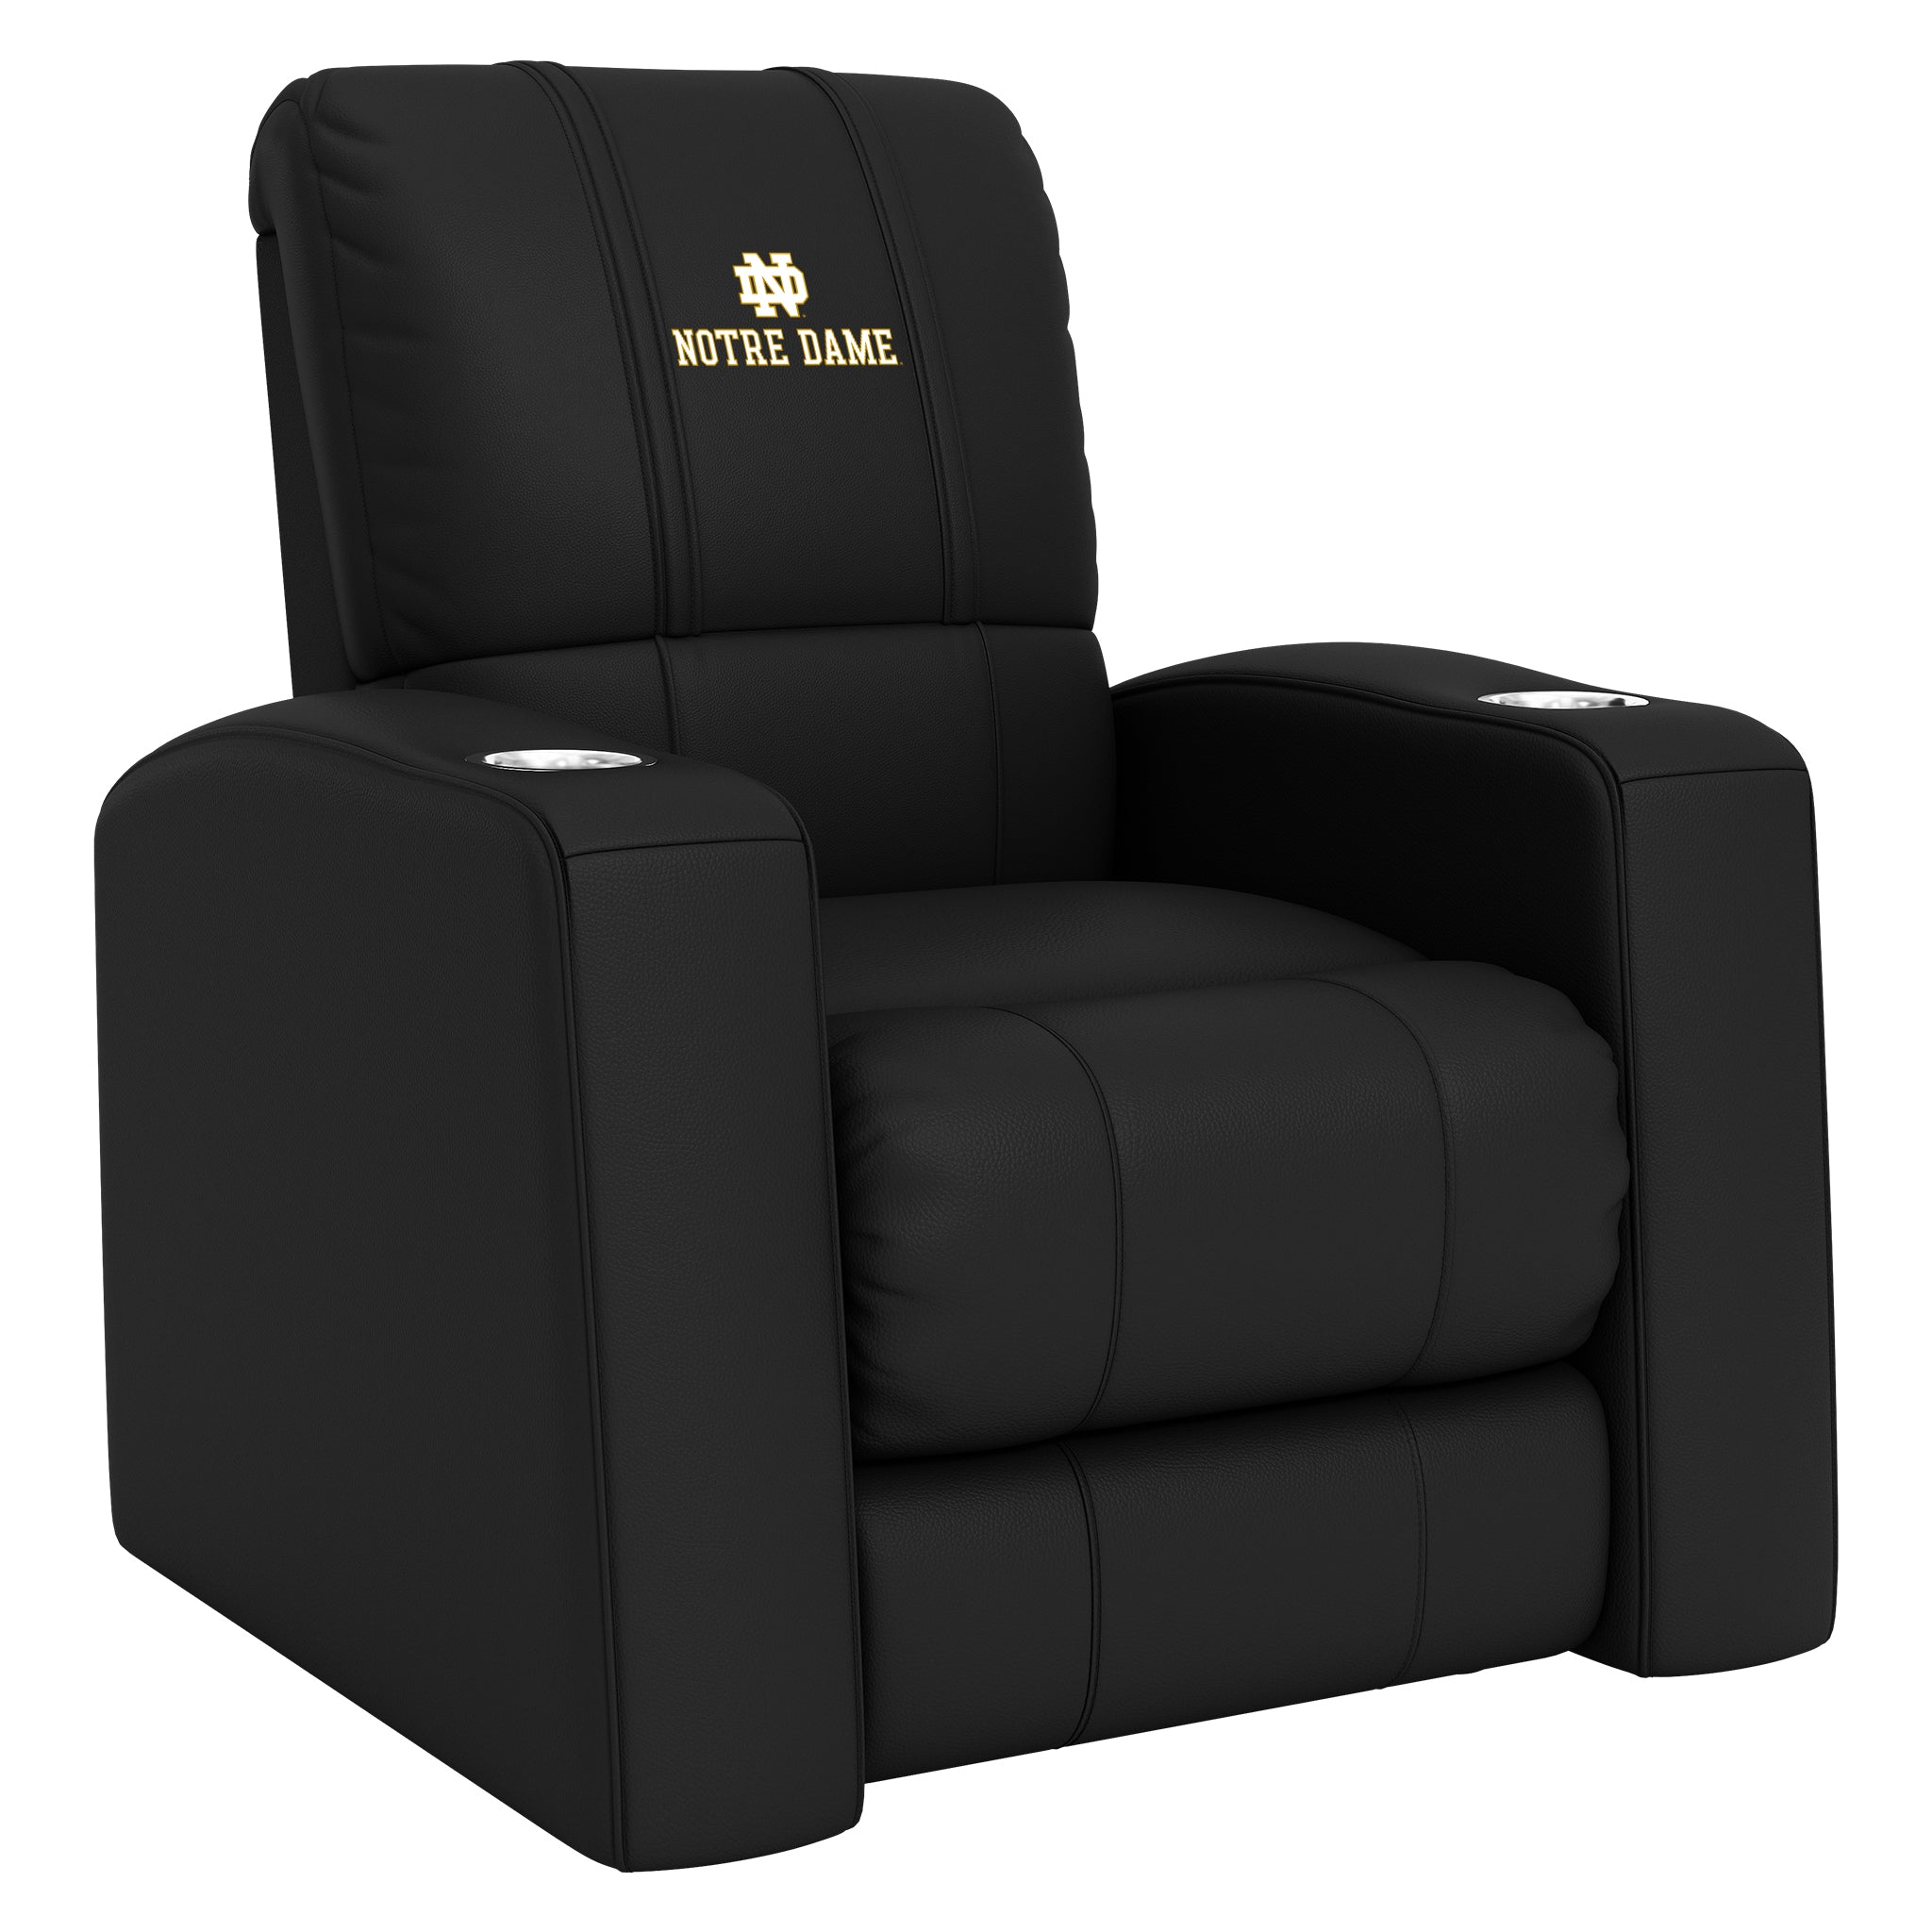 Notre Dame Home Theater Recliner with Notre Dame Alternate Logo